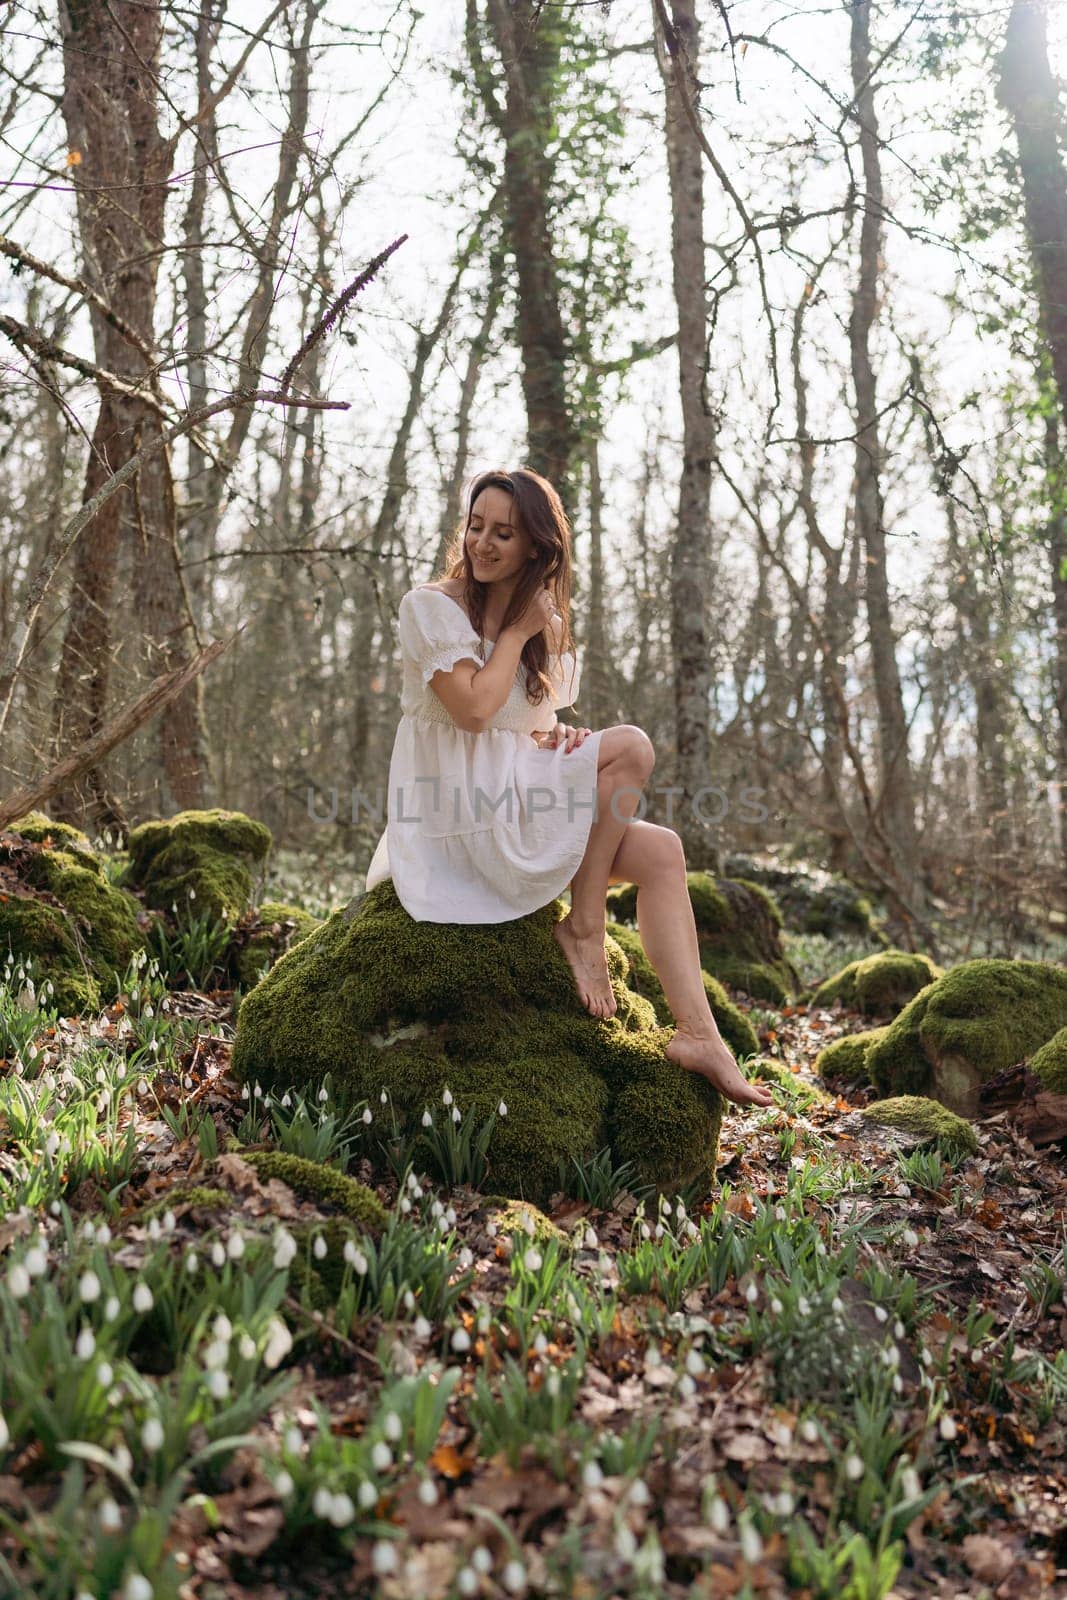 Portrait of a woman in the forest. She is sitting in a white dress on a meadow with snowdrops in a spring forest.